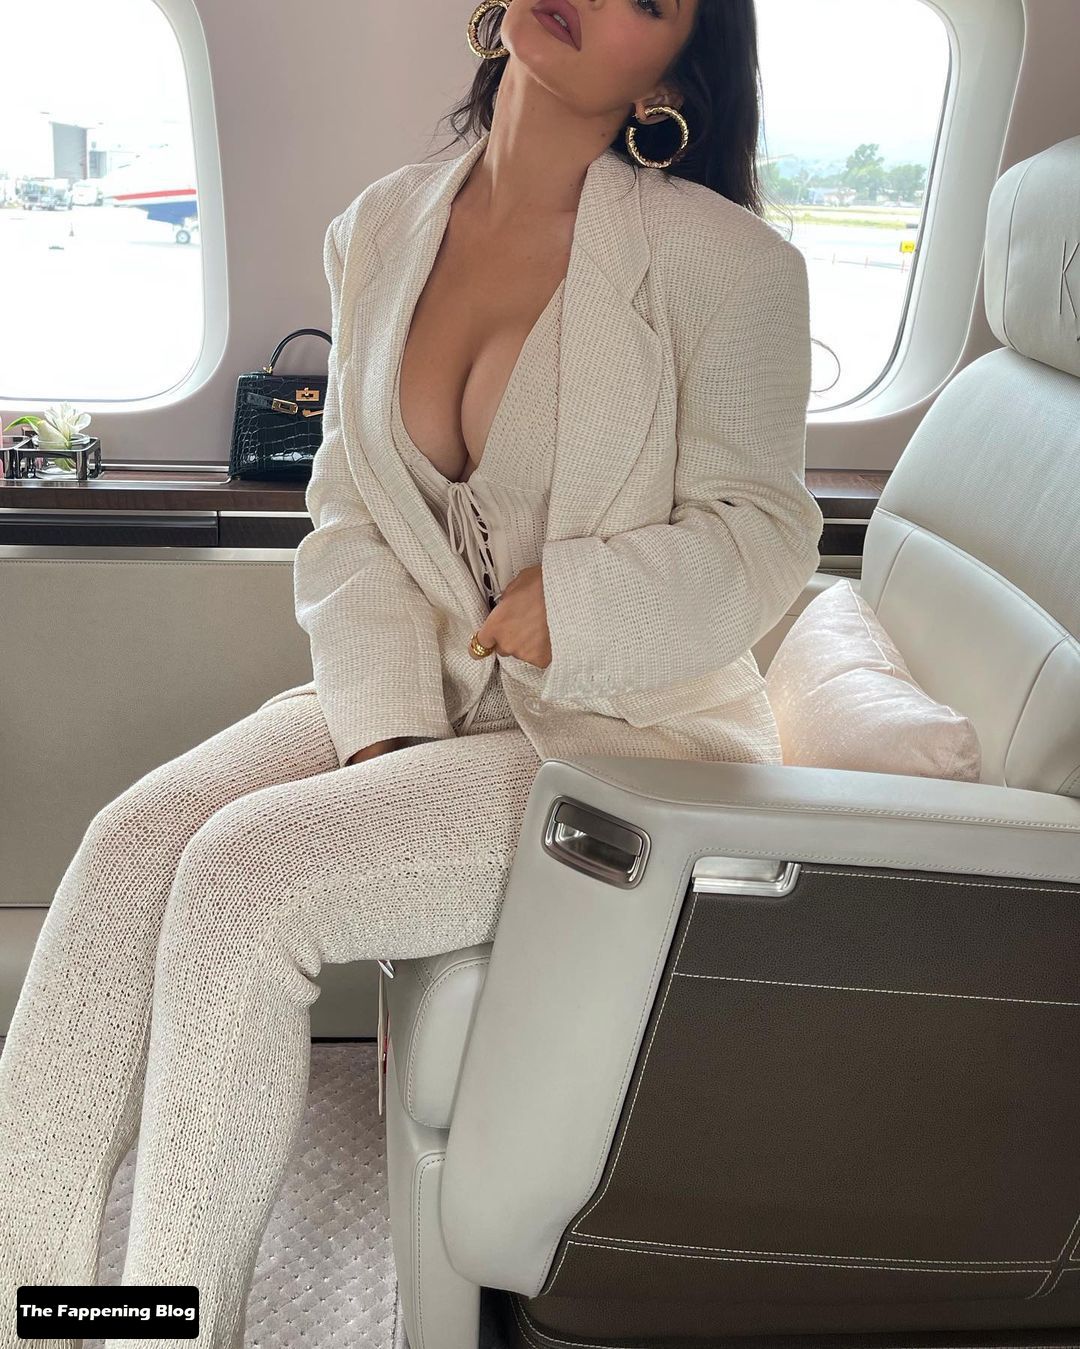 Kylie-Jenner-Sexy-Cleavage-thefappeningblog.com_.jpg